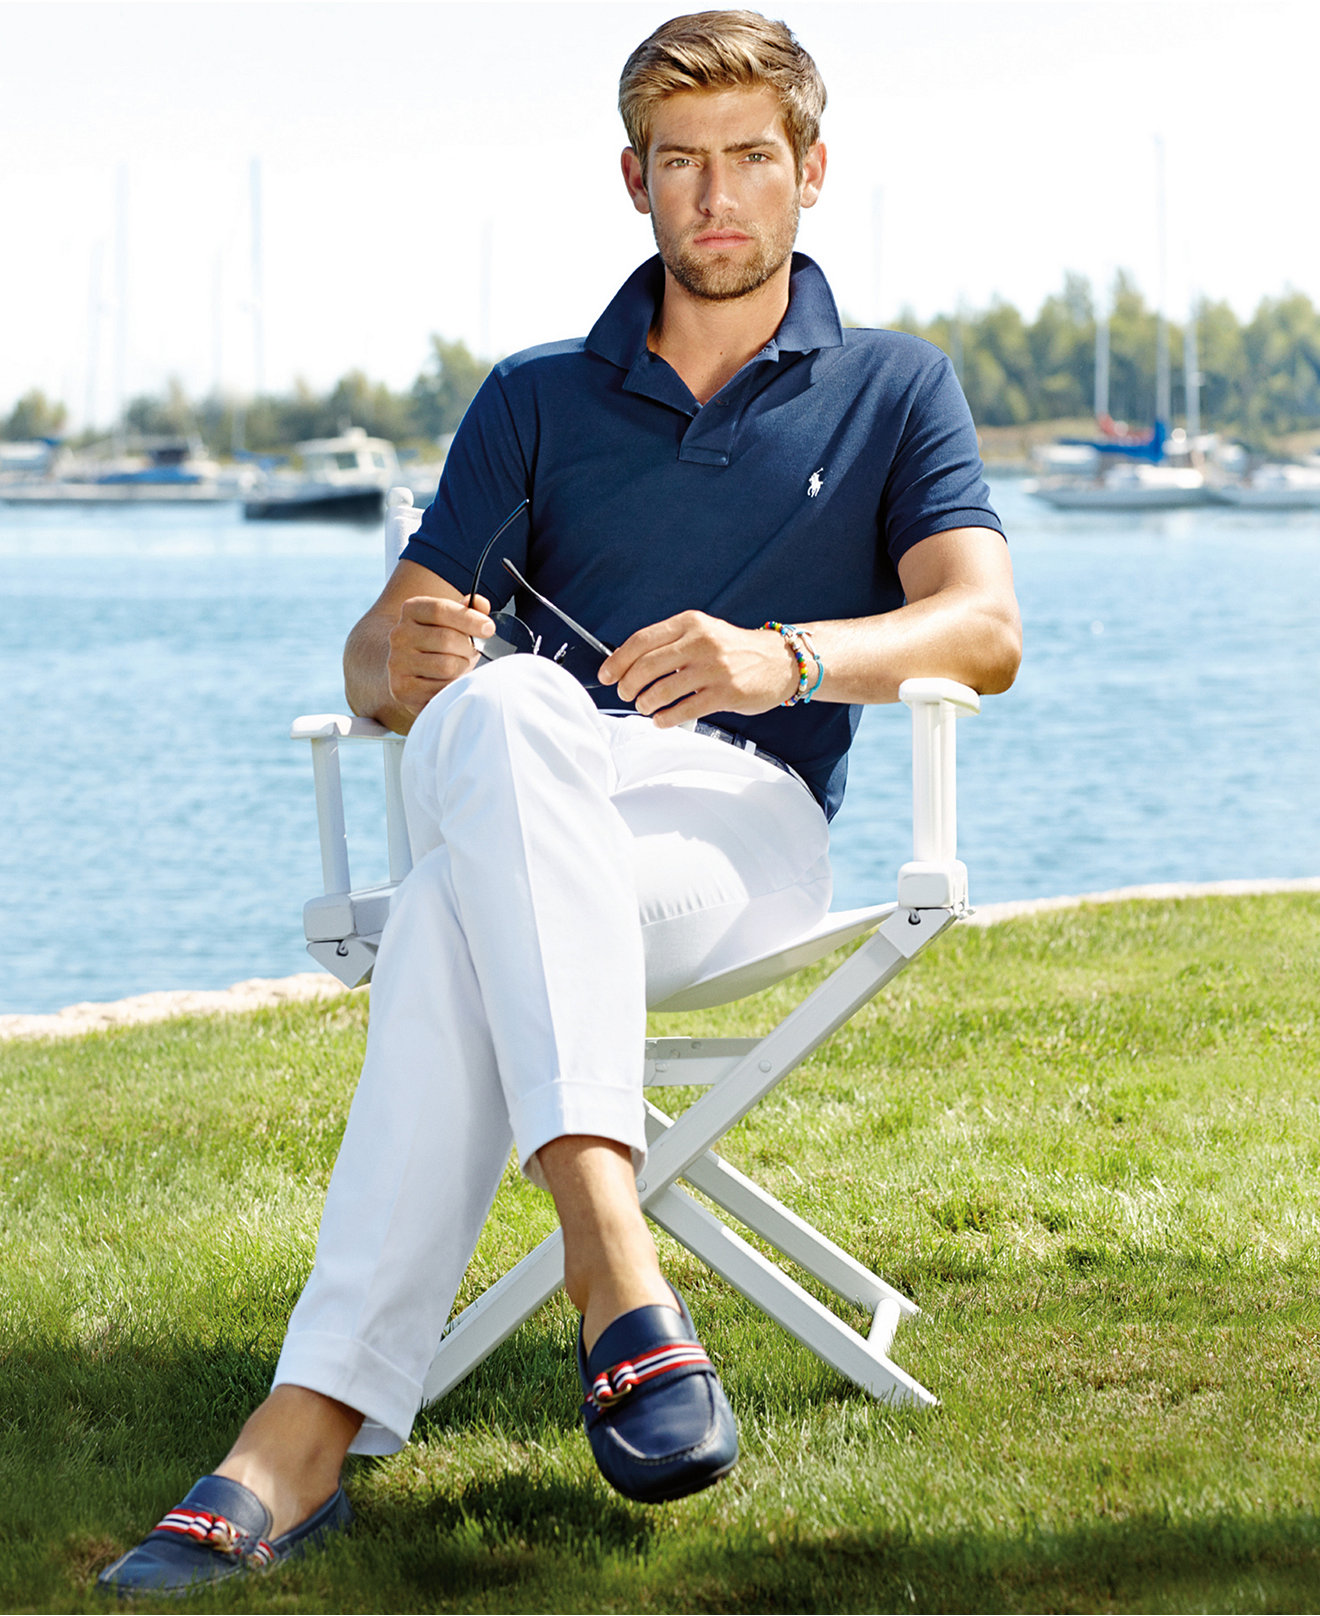 Spring Summer’15 Best Selling Polos - Every Man Must Own! - Luxury ...